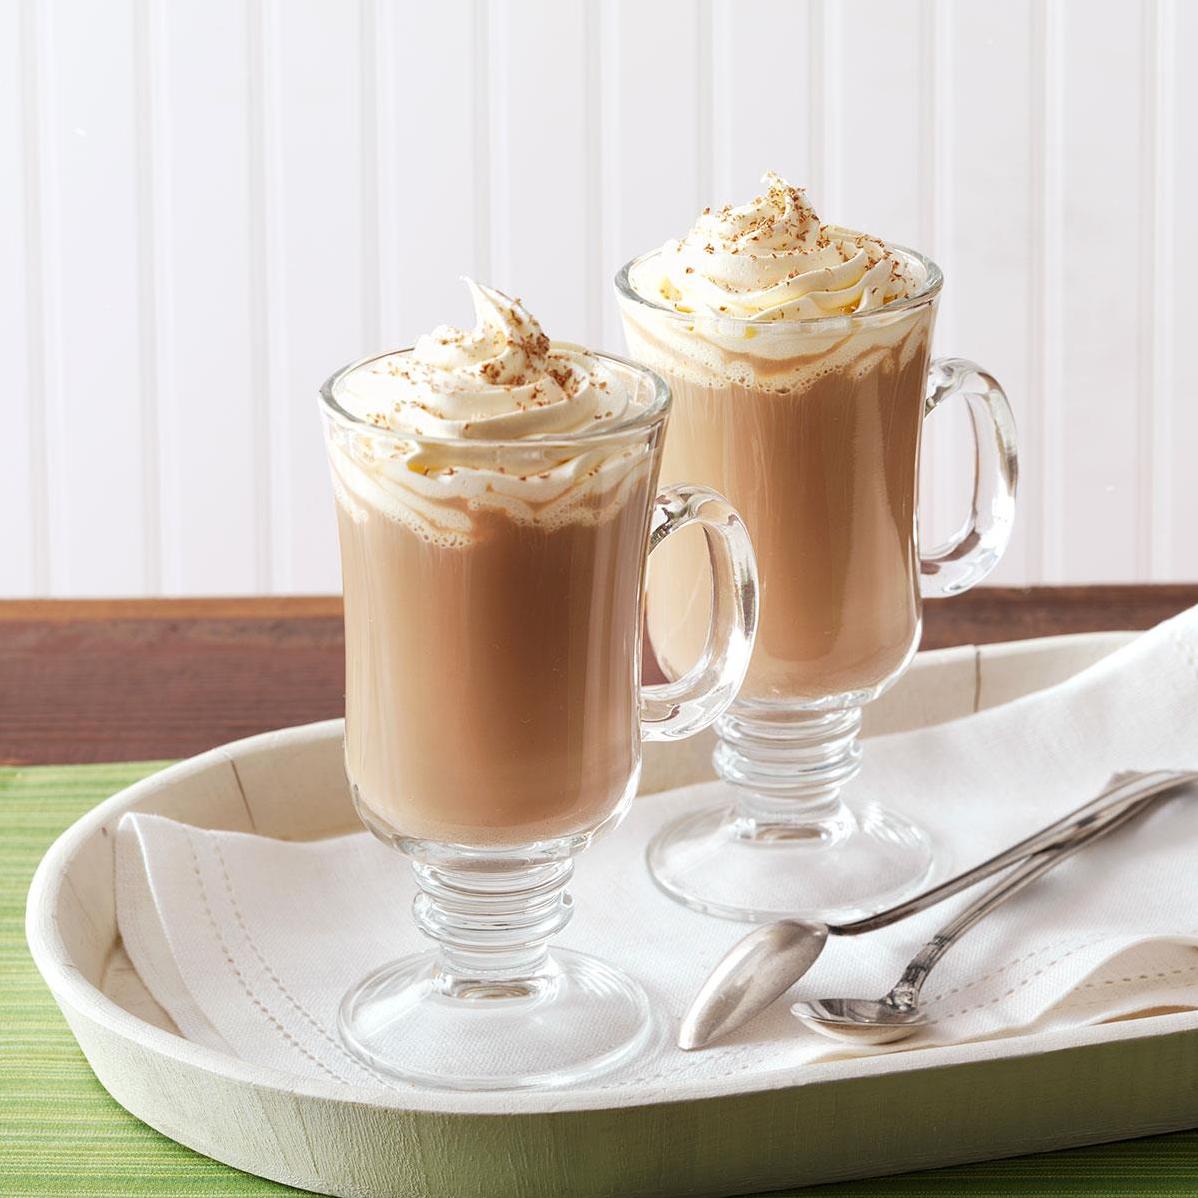  Cozy up with a comforting cup of hot mocha infused with the decadent taste of Irish cream.